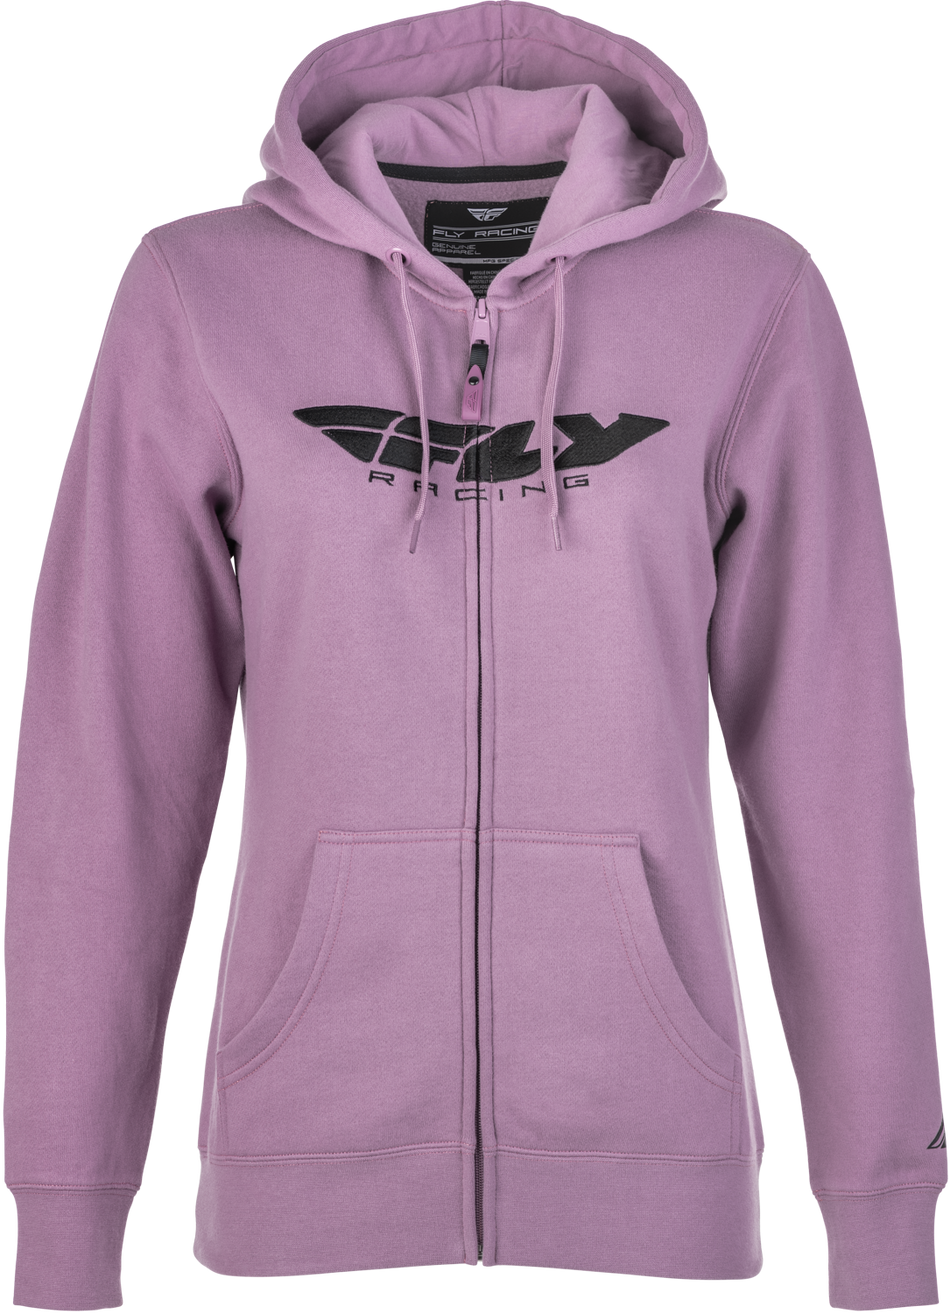 FLY RACING Women's Fly Corporate Zip Up Hoodie Mauve Lg 358-0062L